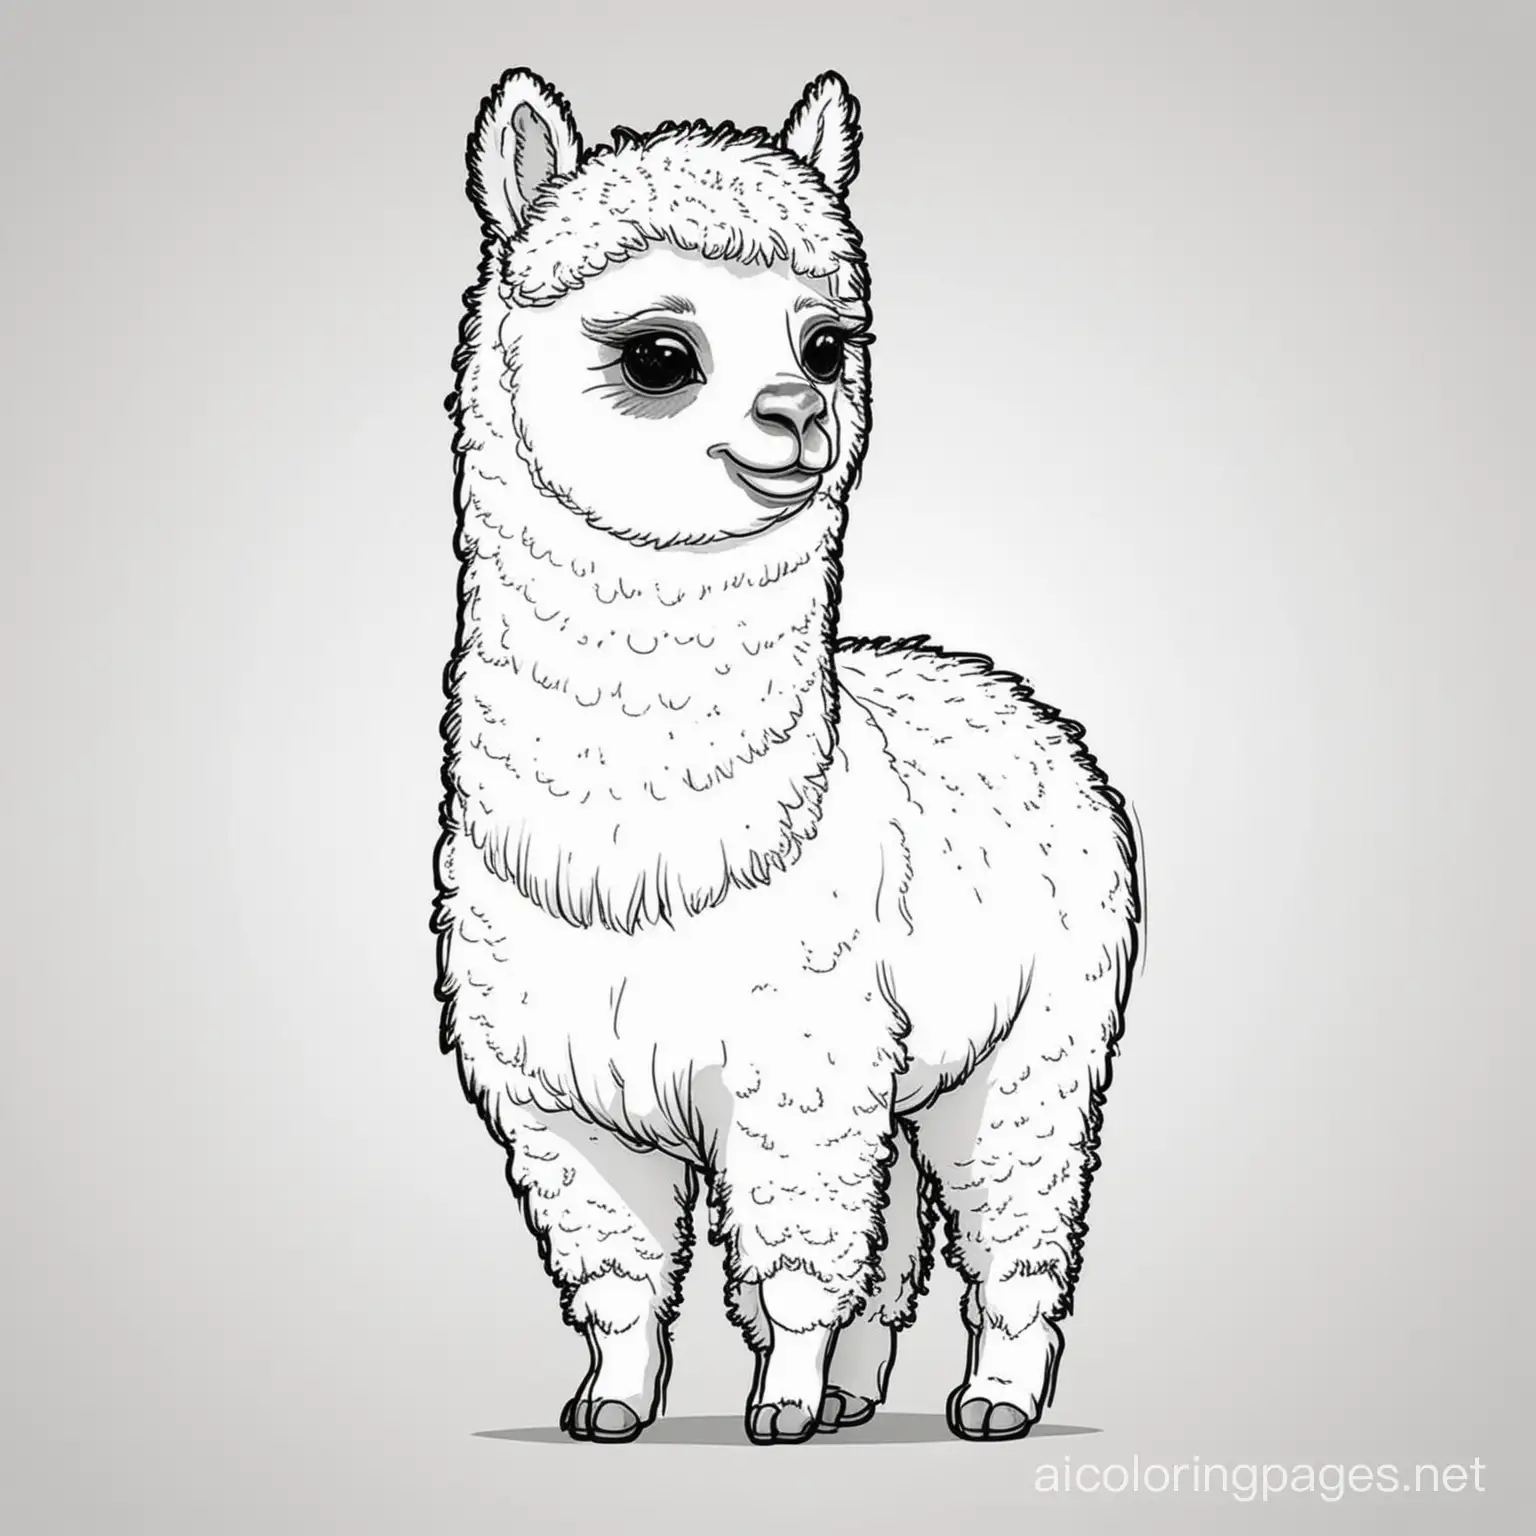 Alpaca-Line-Art-Coloring-Page-for-Kids